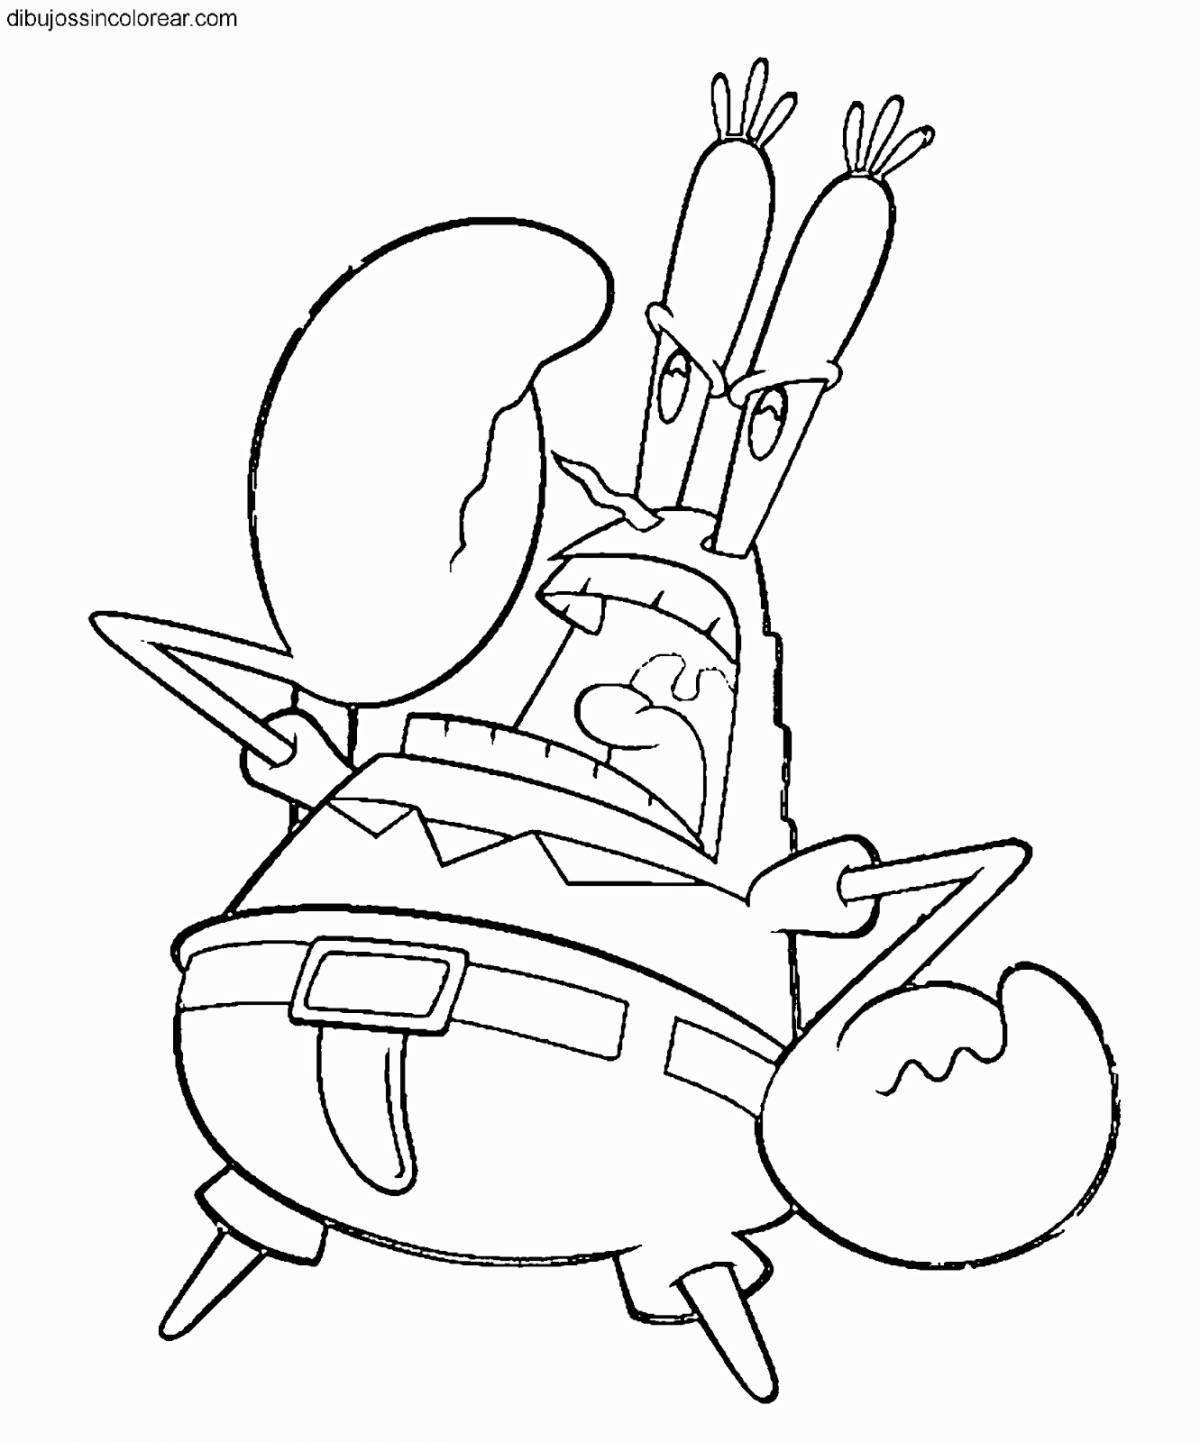 Coloring playful krusty crabs